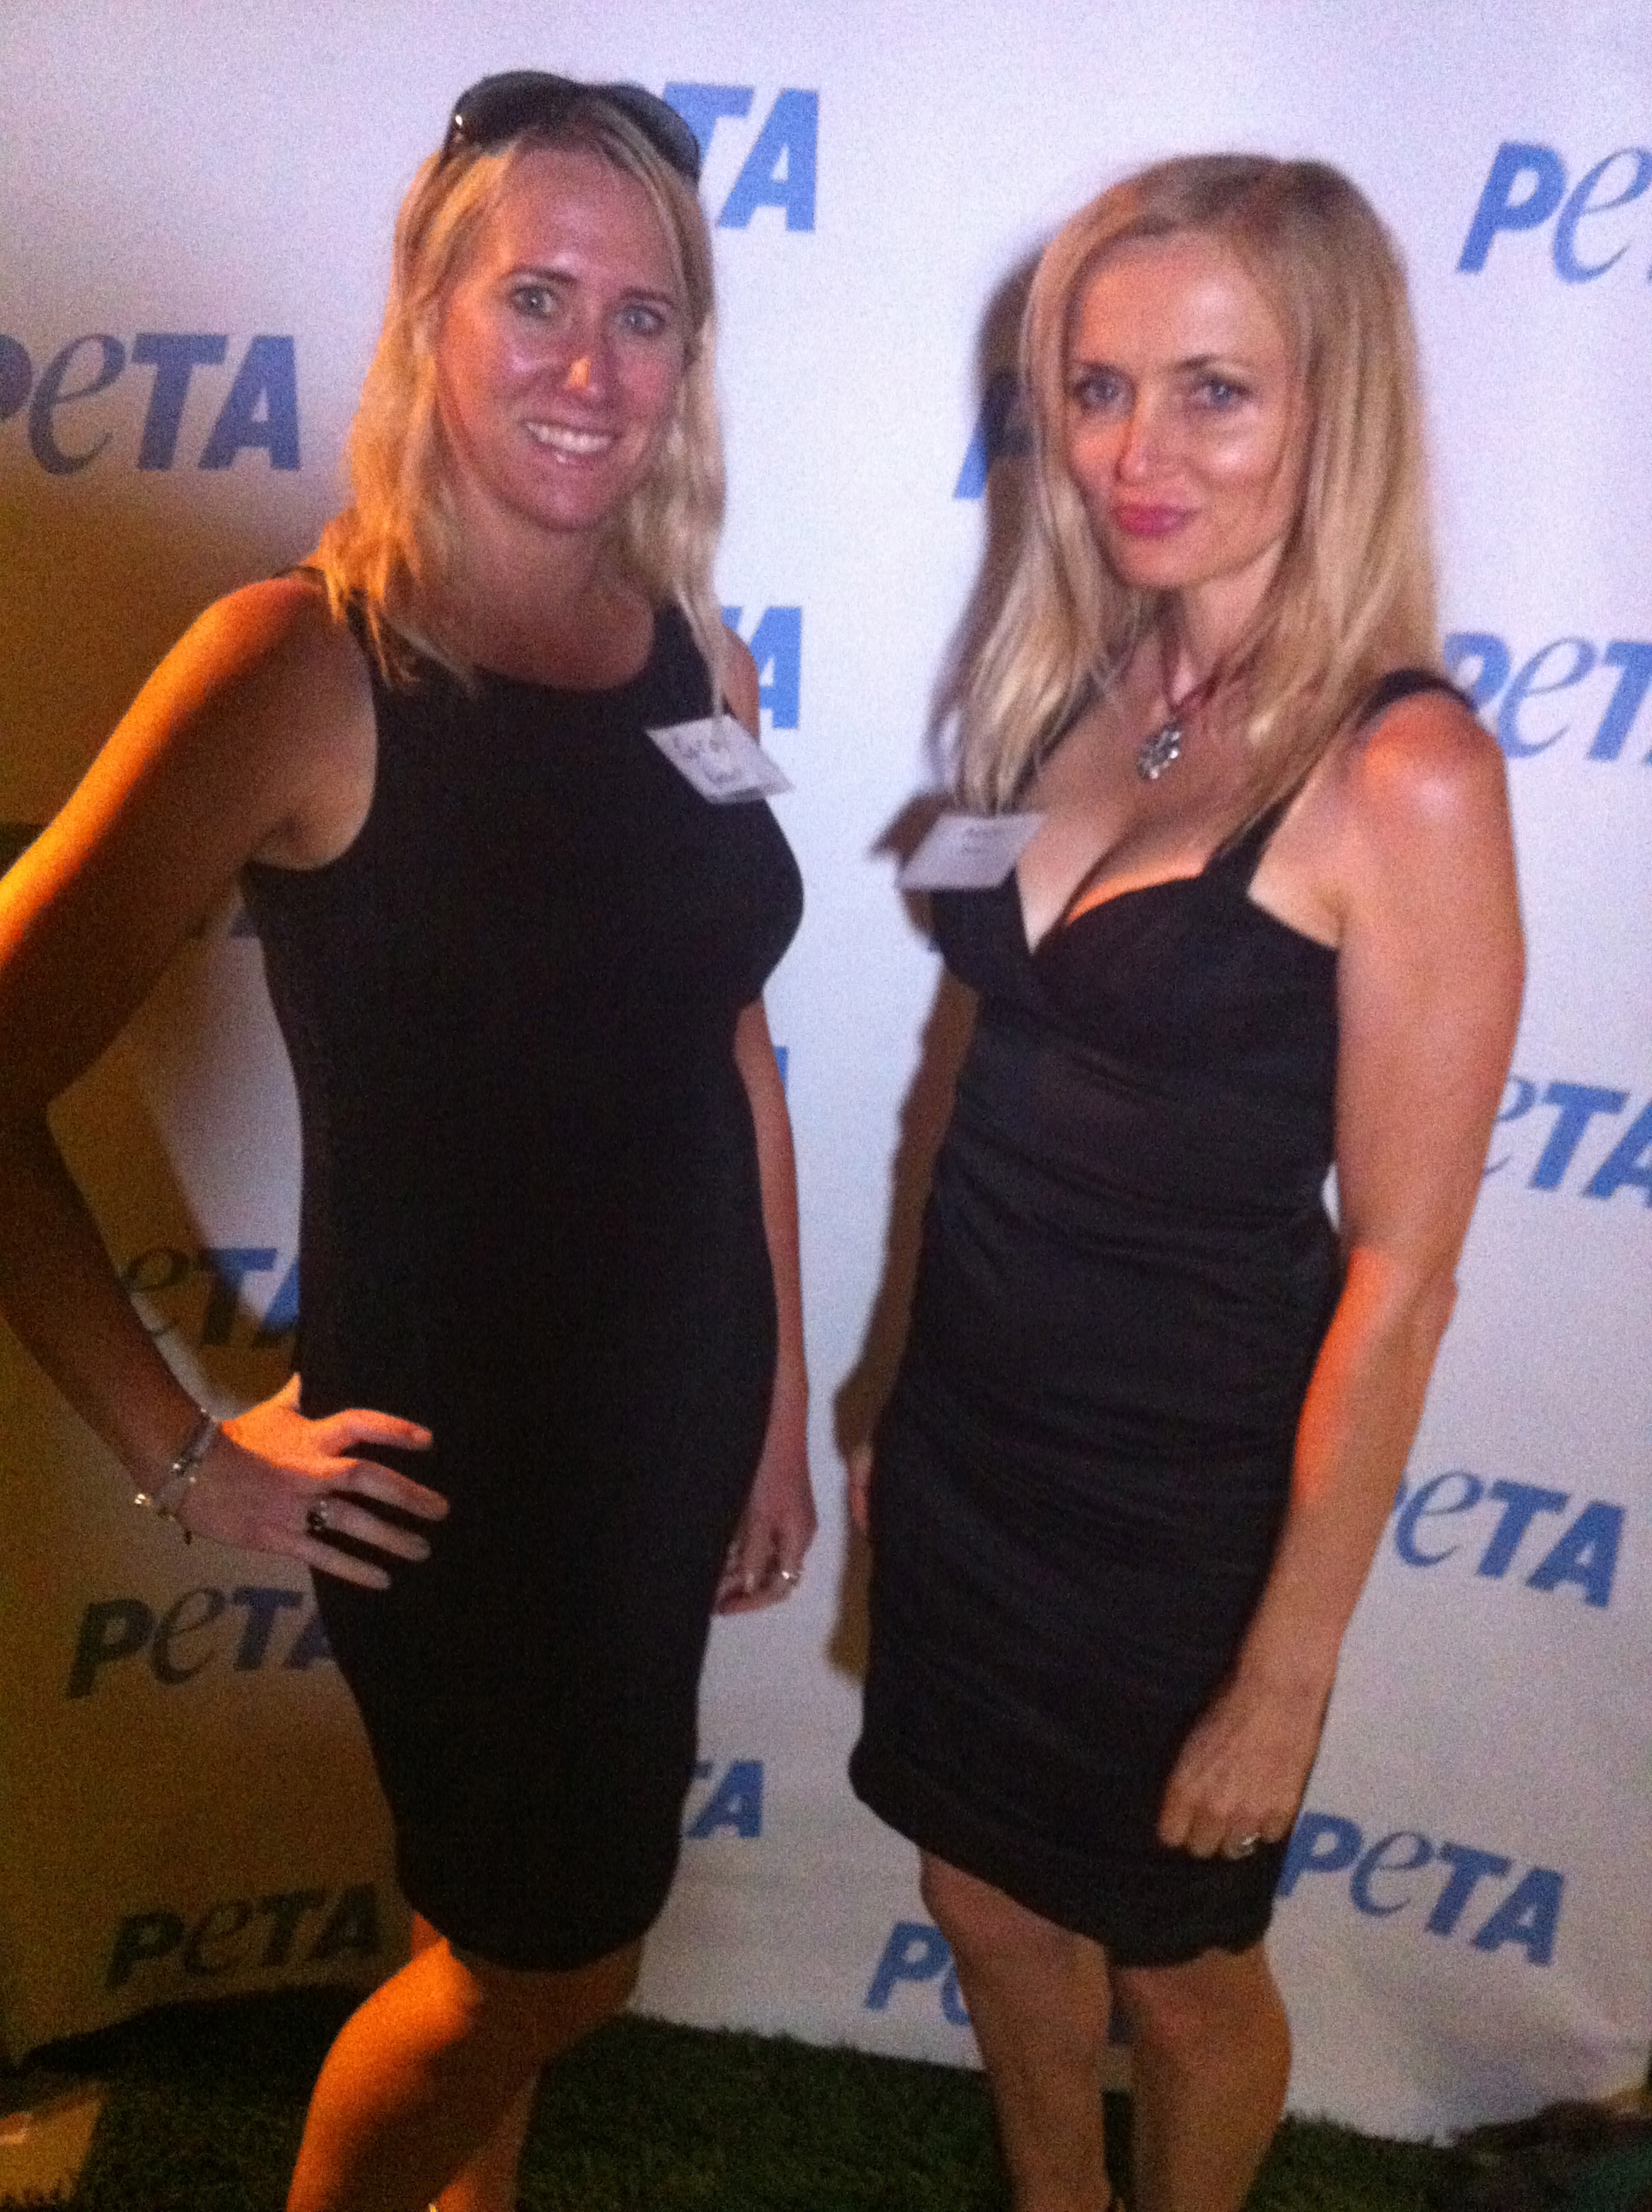 Peta Event with Cara J. Russell